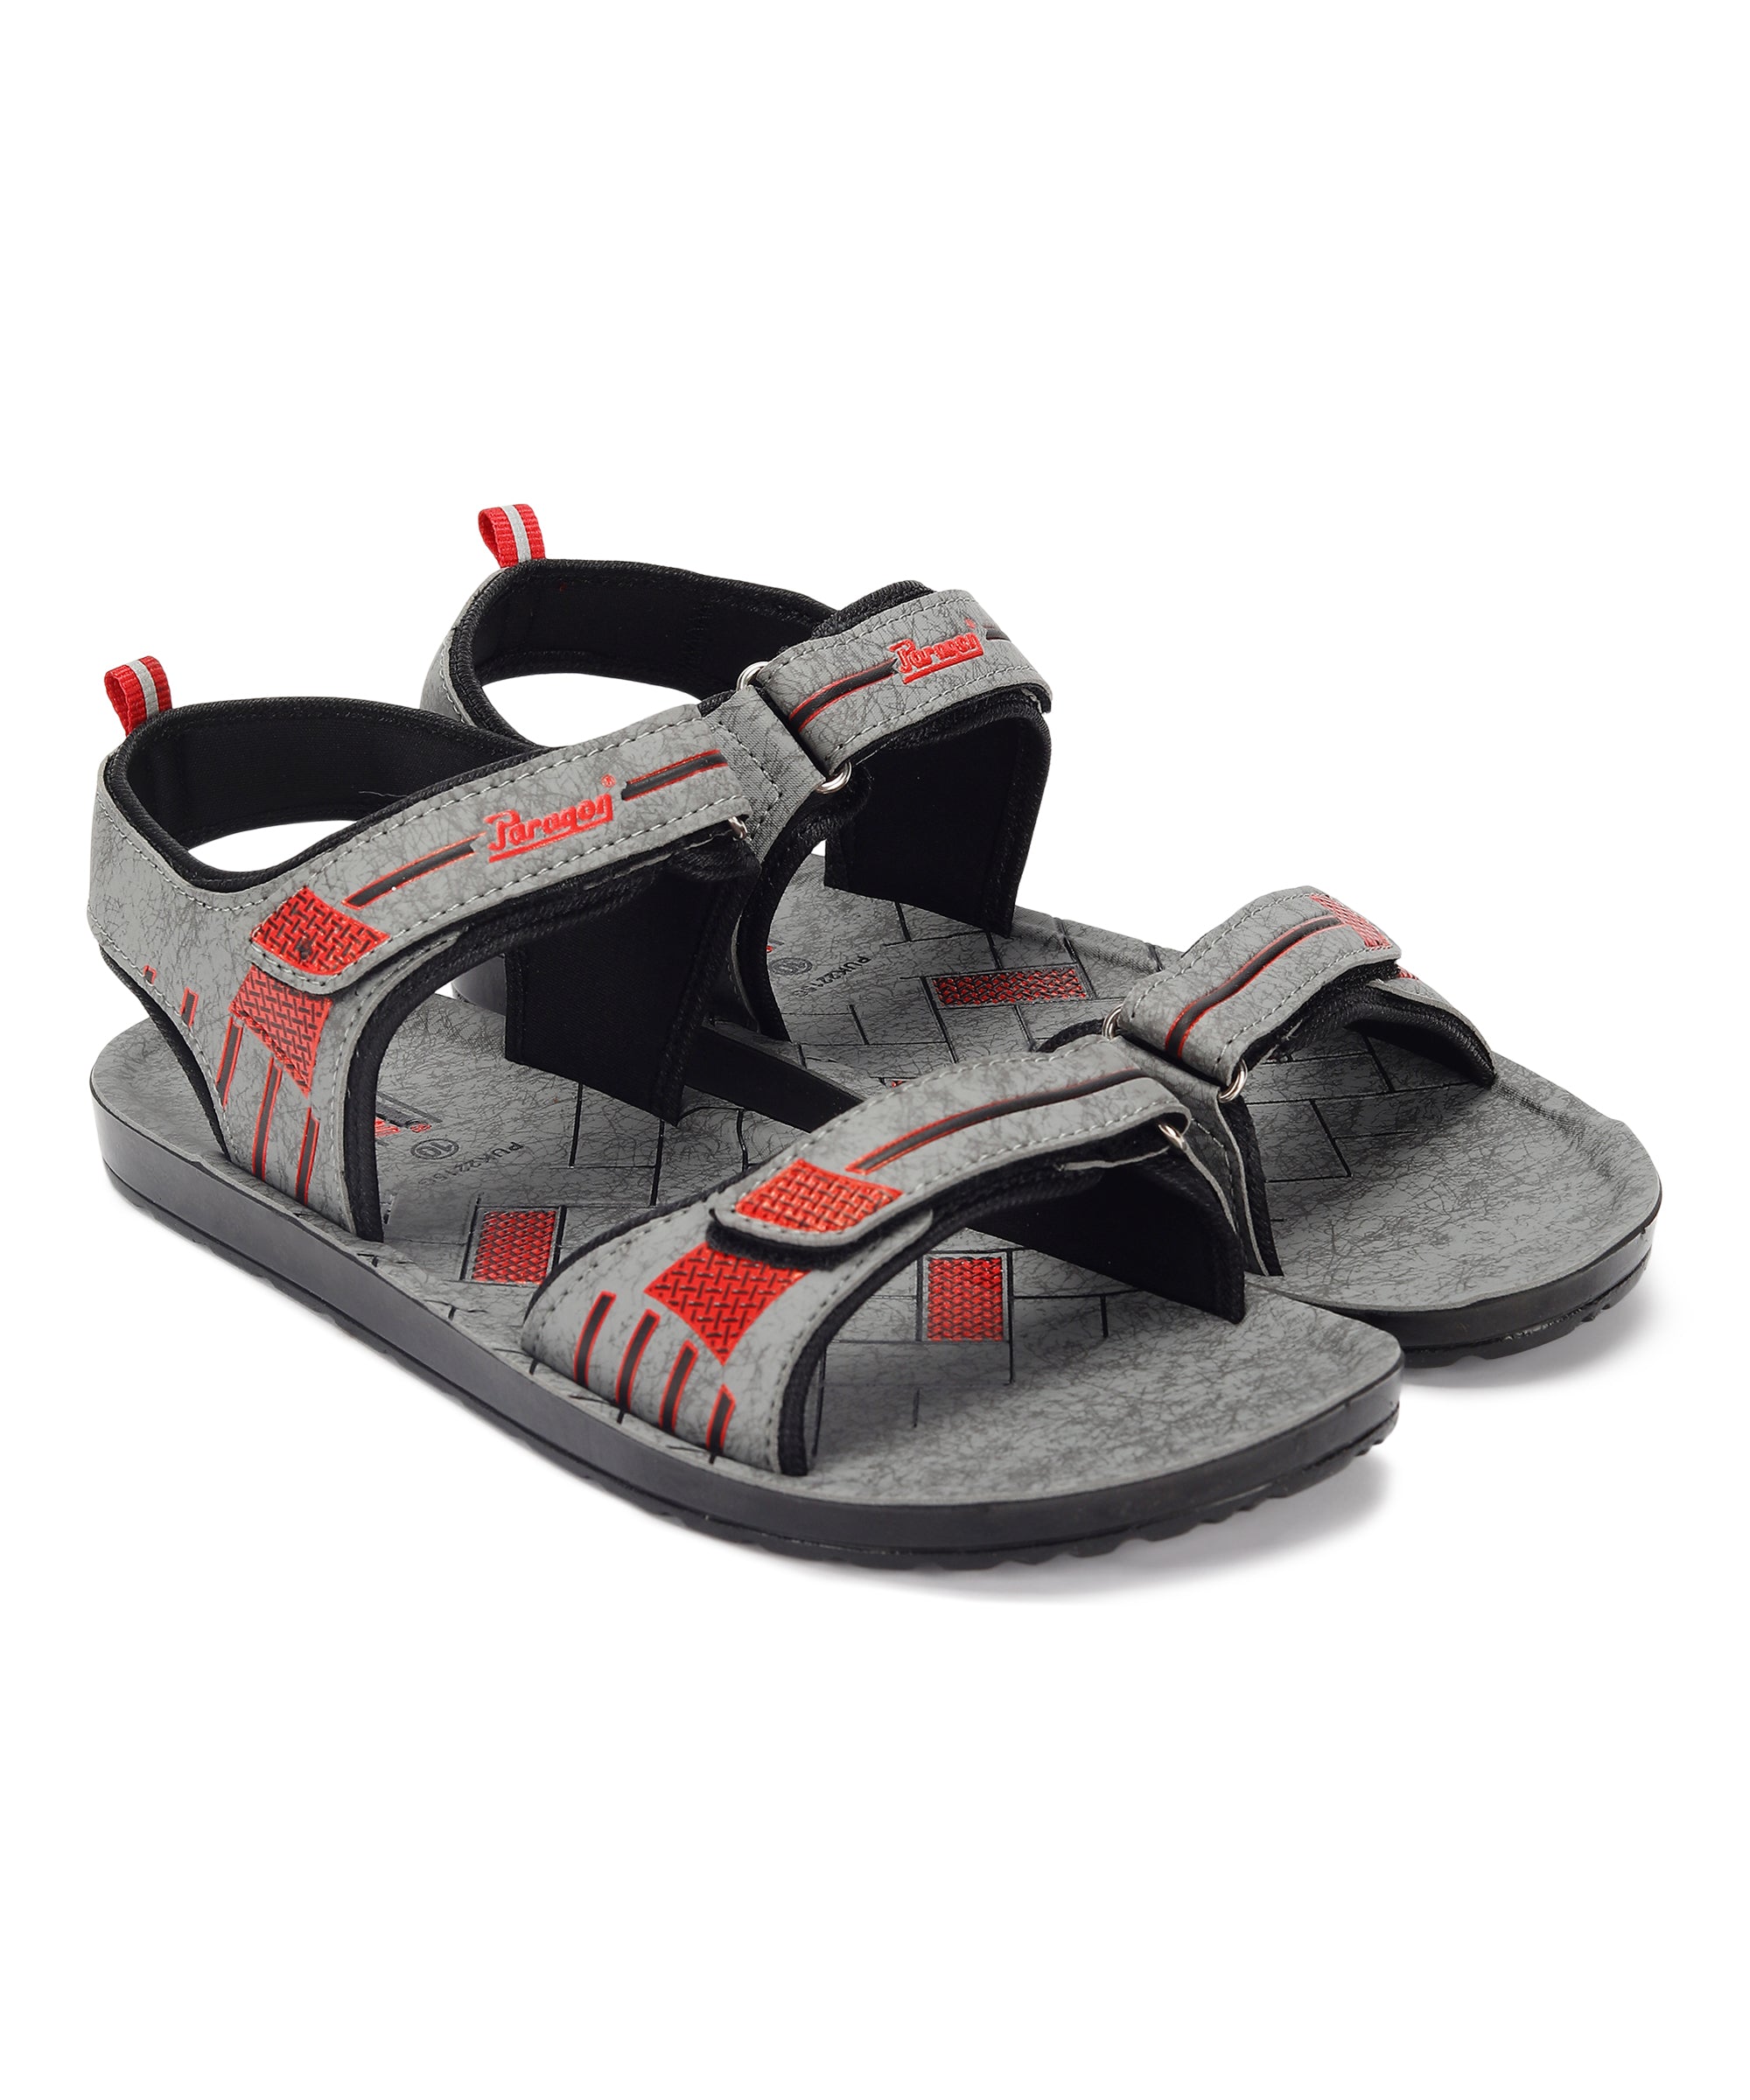 Paragon PUK2215G Men Stylish Sandals | Comfortable Sandals for Daily Outdoor Use | Casual Formal Sandals with Cushioned Soles